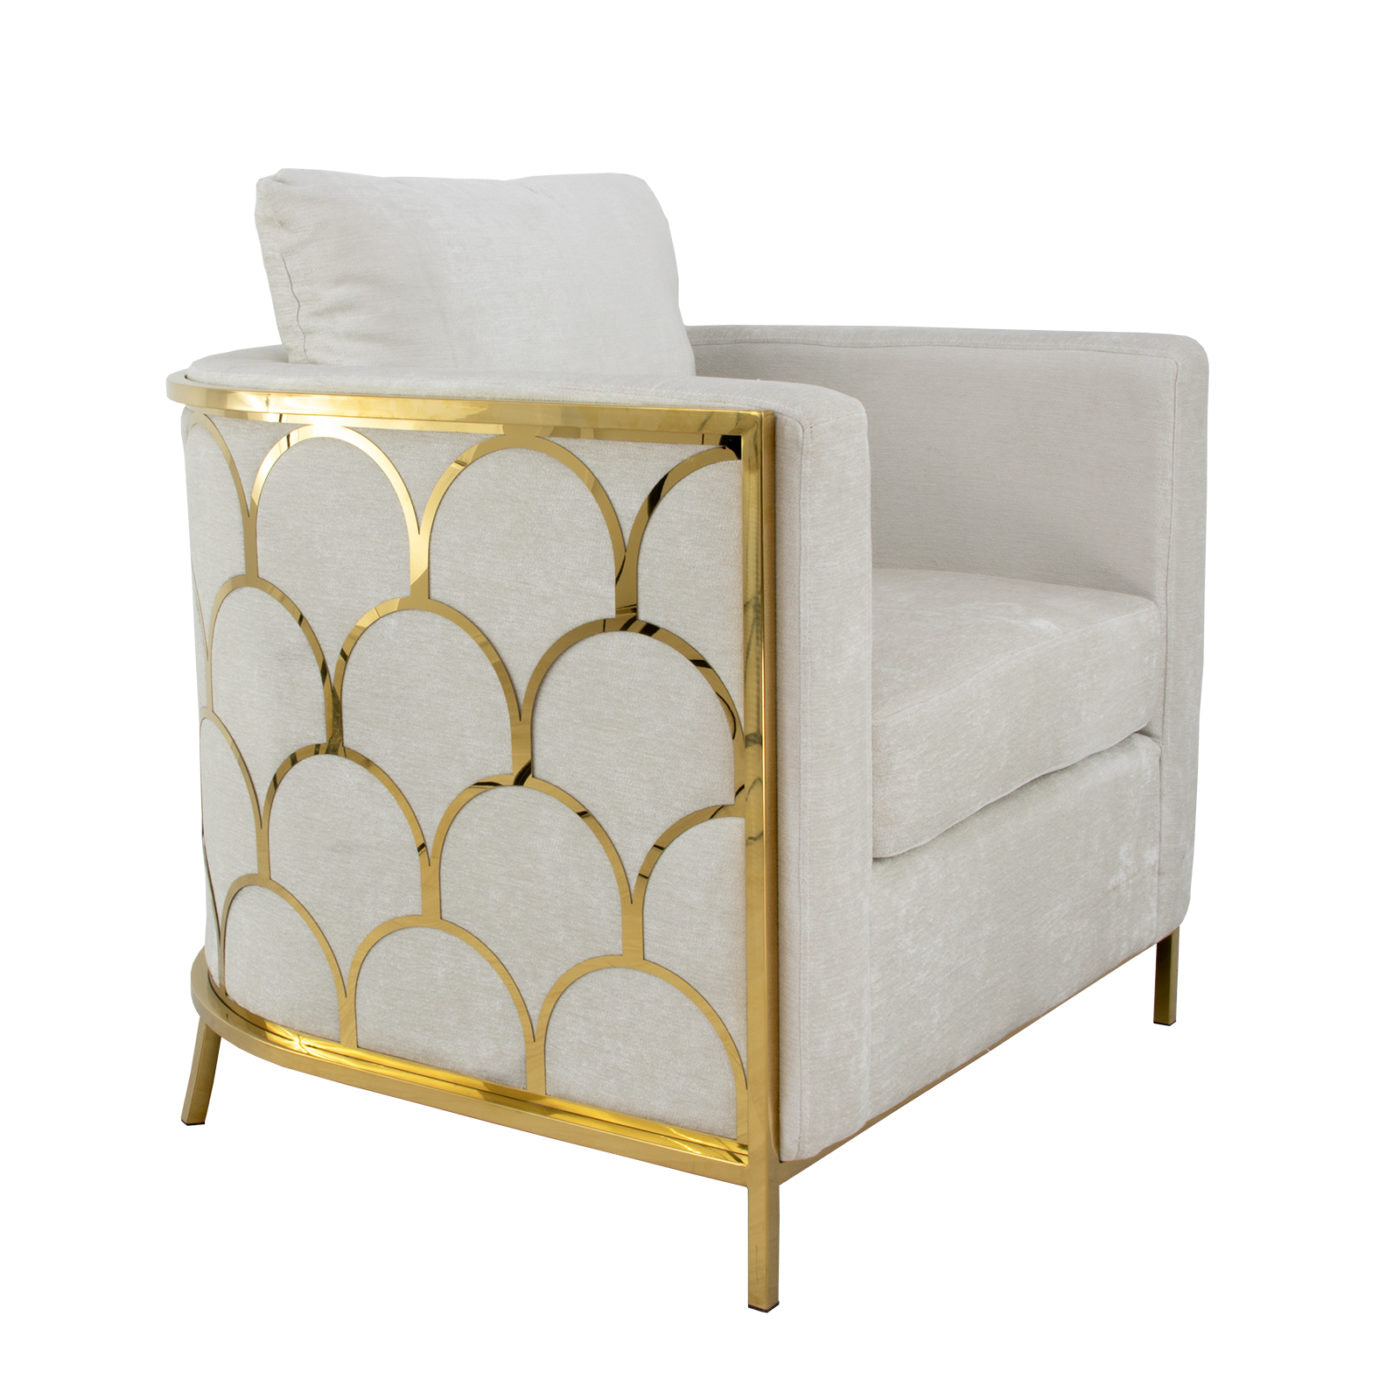 Verona Gold and Grey Chair